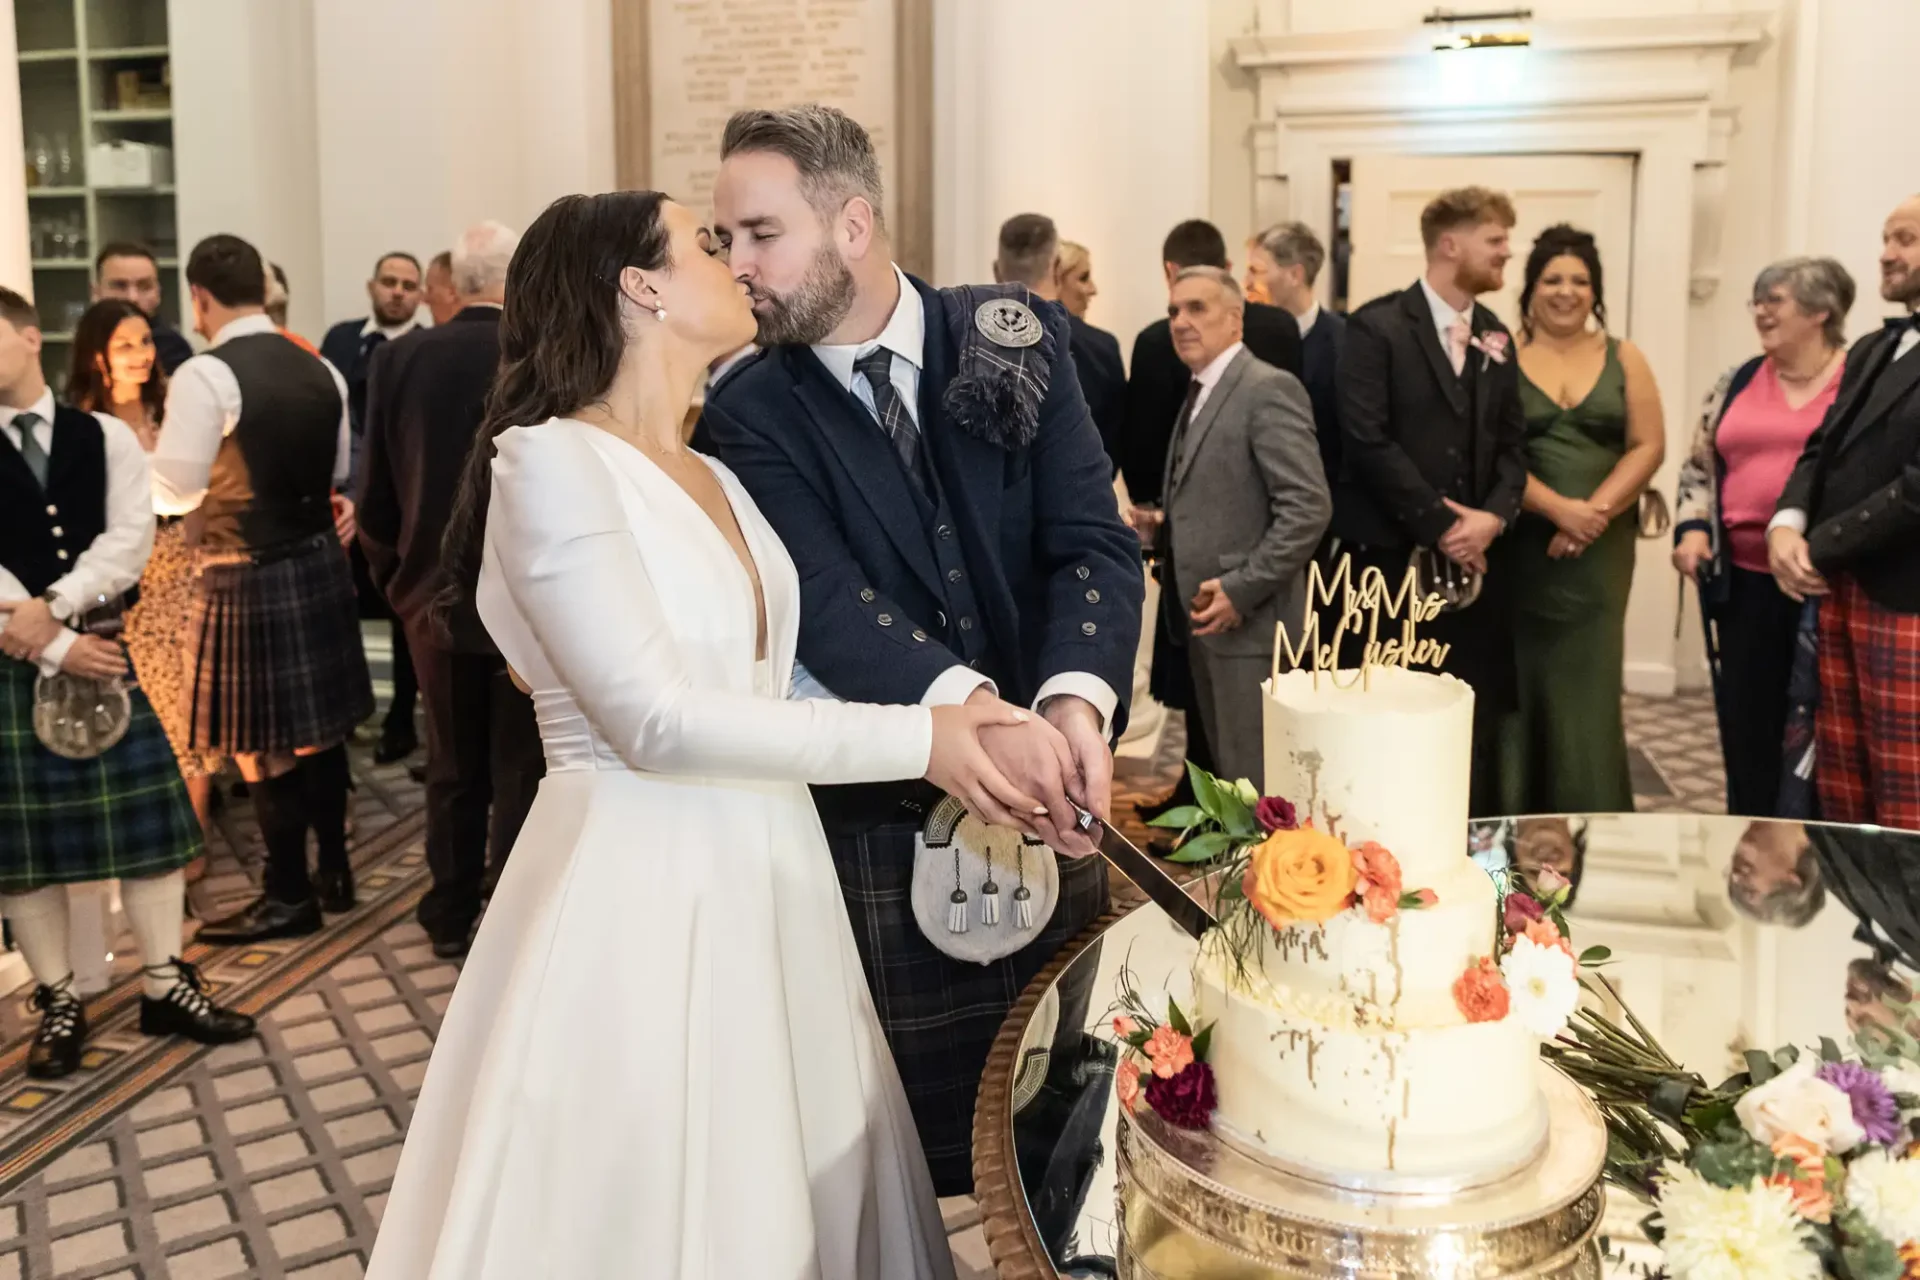 A bride and groom in traditional scottish attire kiss while cutting a wedding cake, surrounded by guests in a decorated hall.